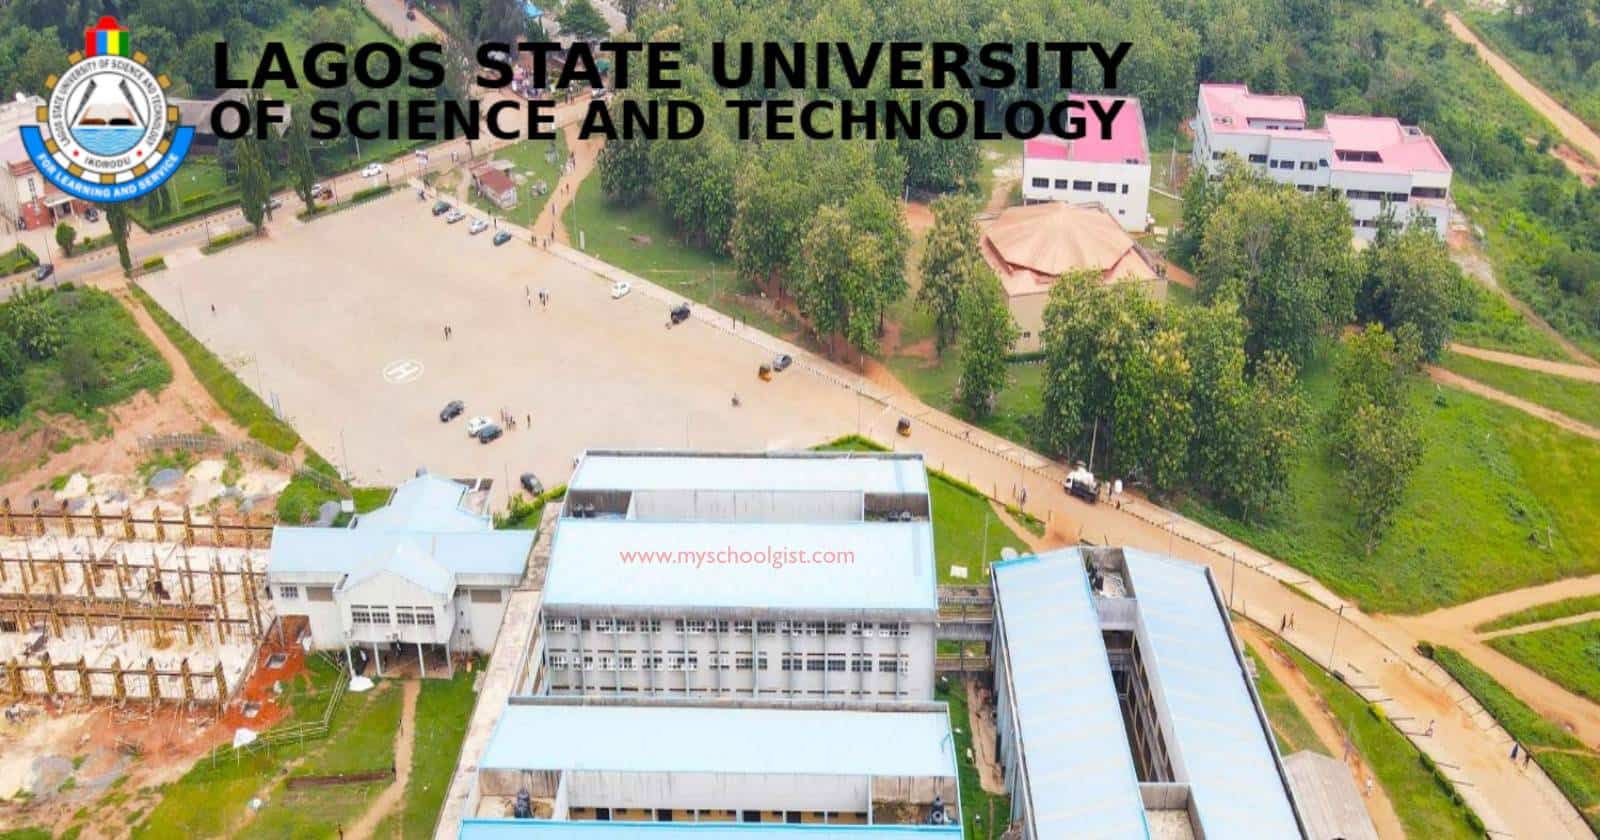 LASUSTECH Cut-Off Mark for 2023/2024 Admission